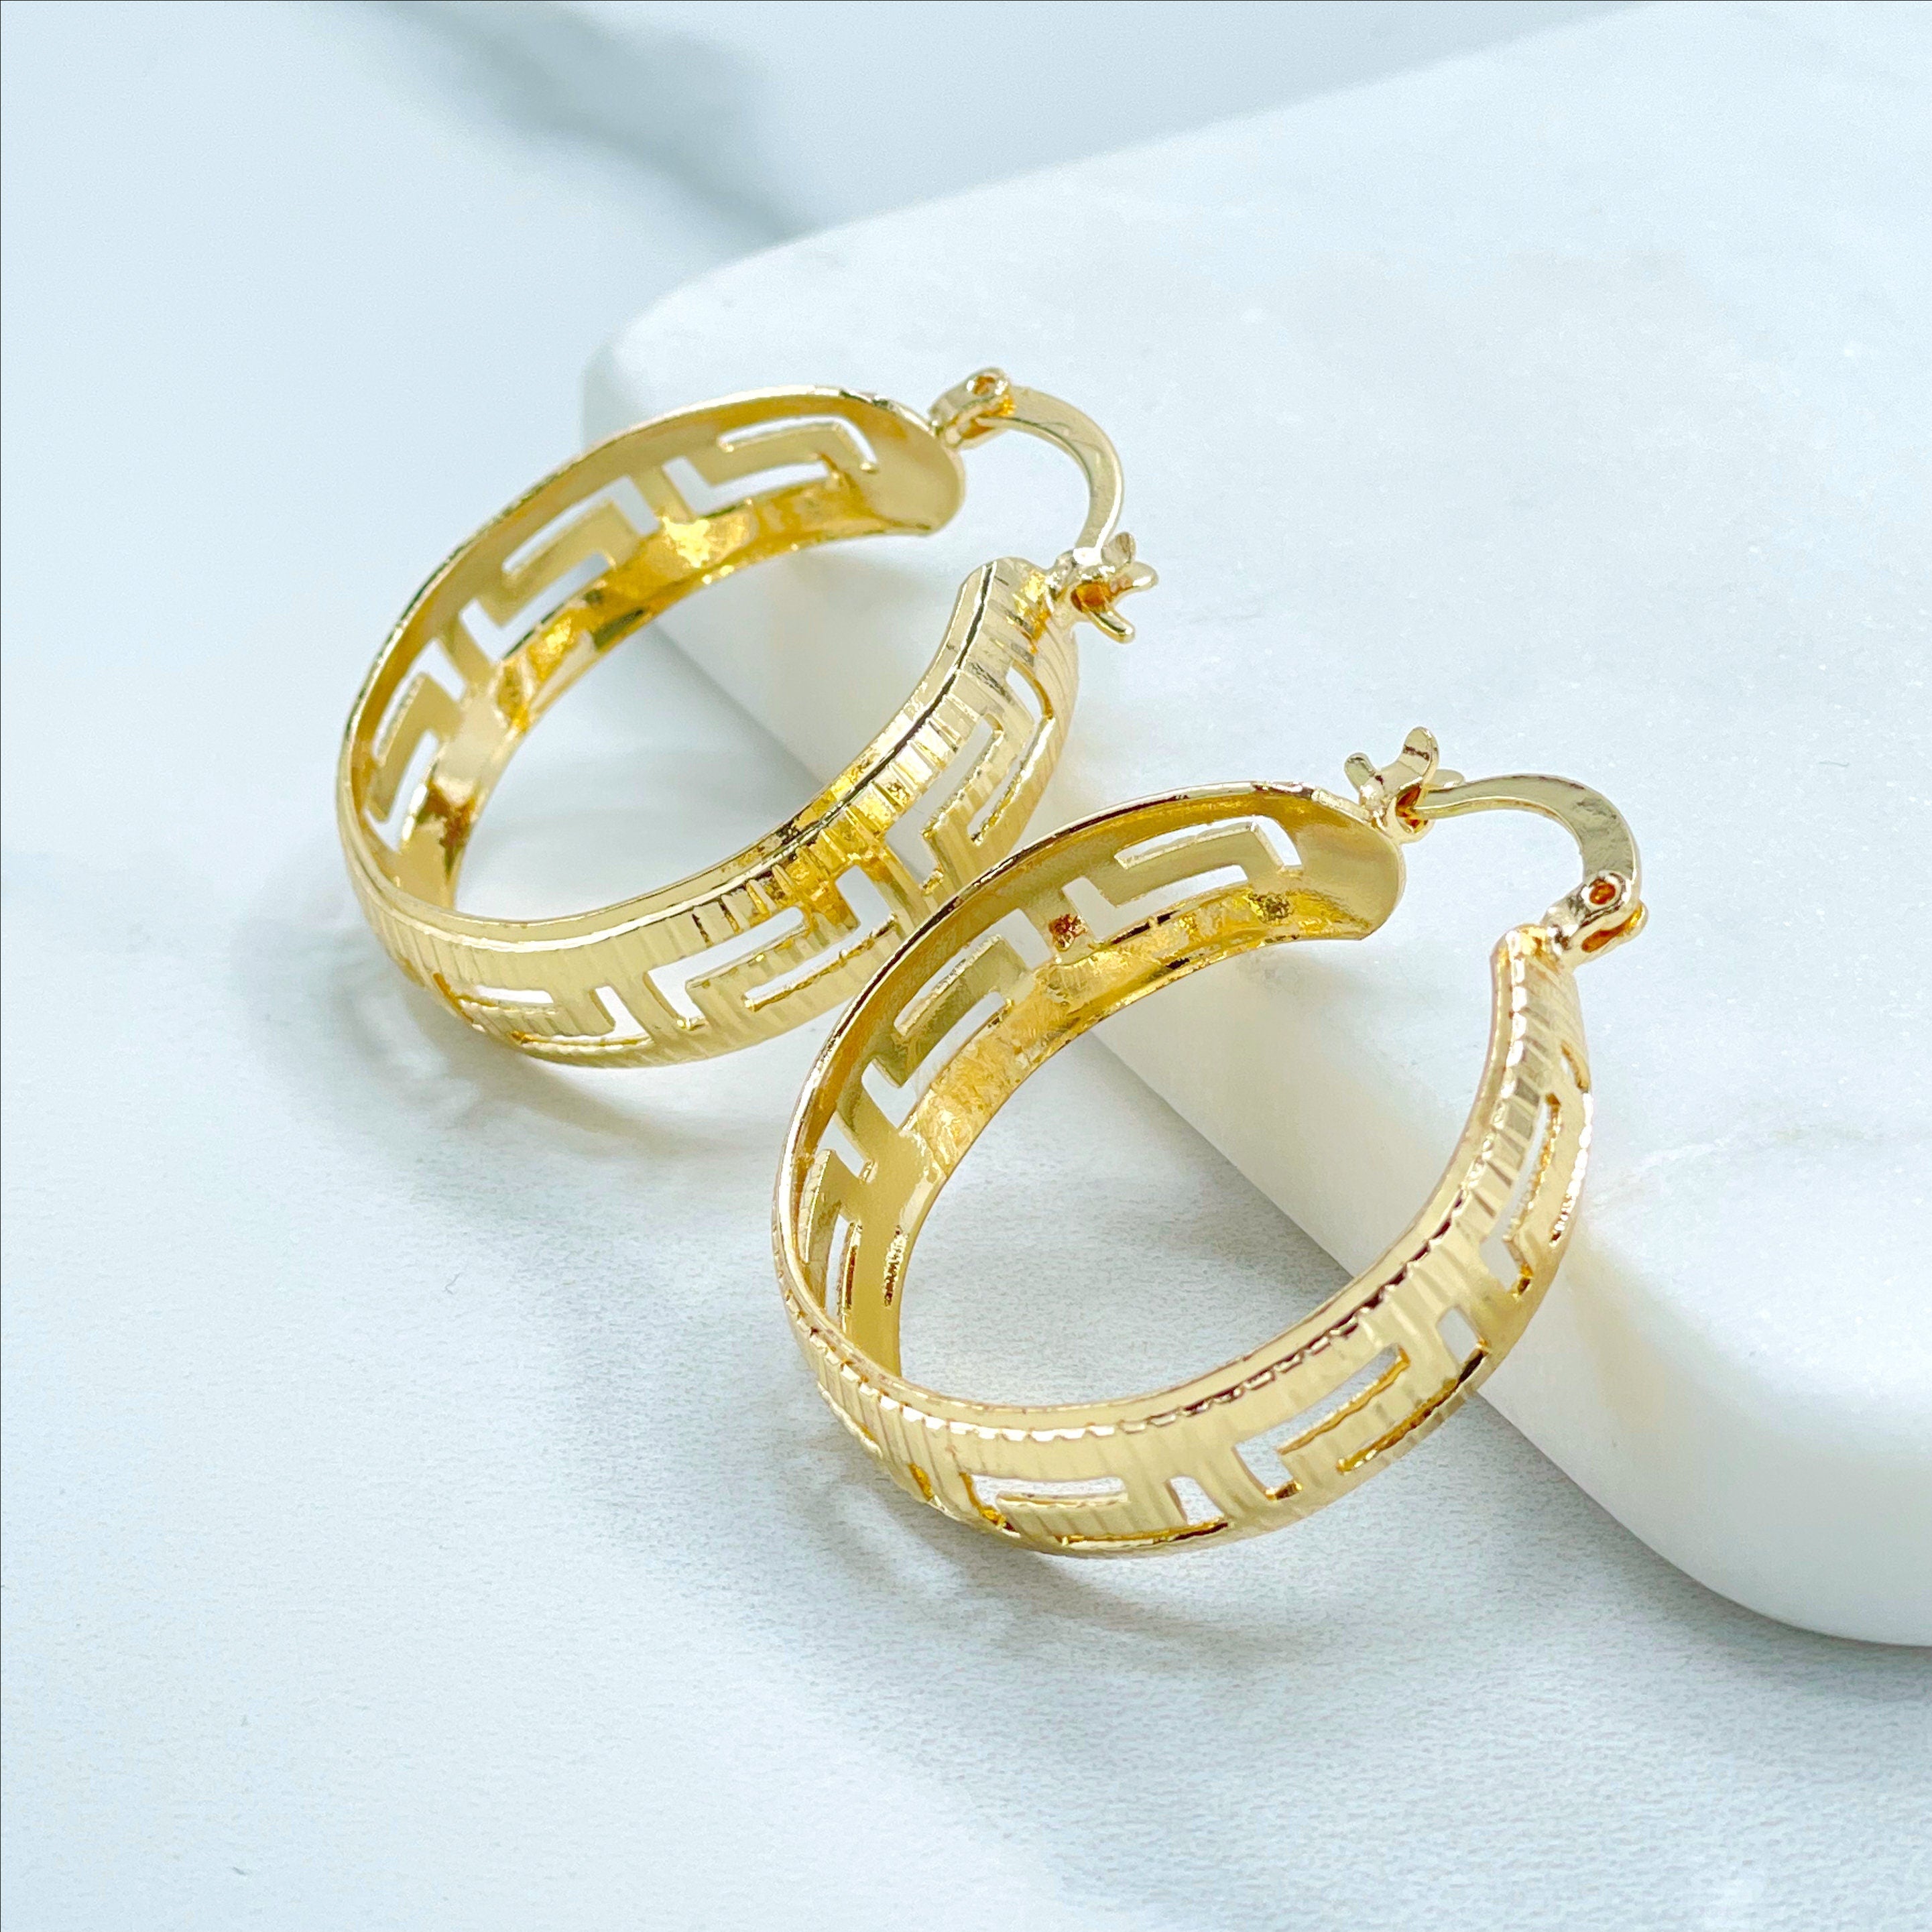 Gold Hoops Online Shopping for Women at Low Prices